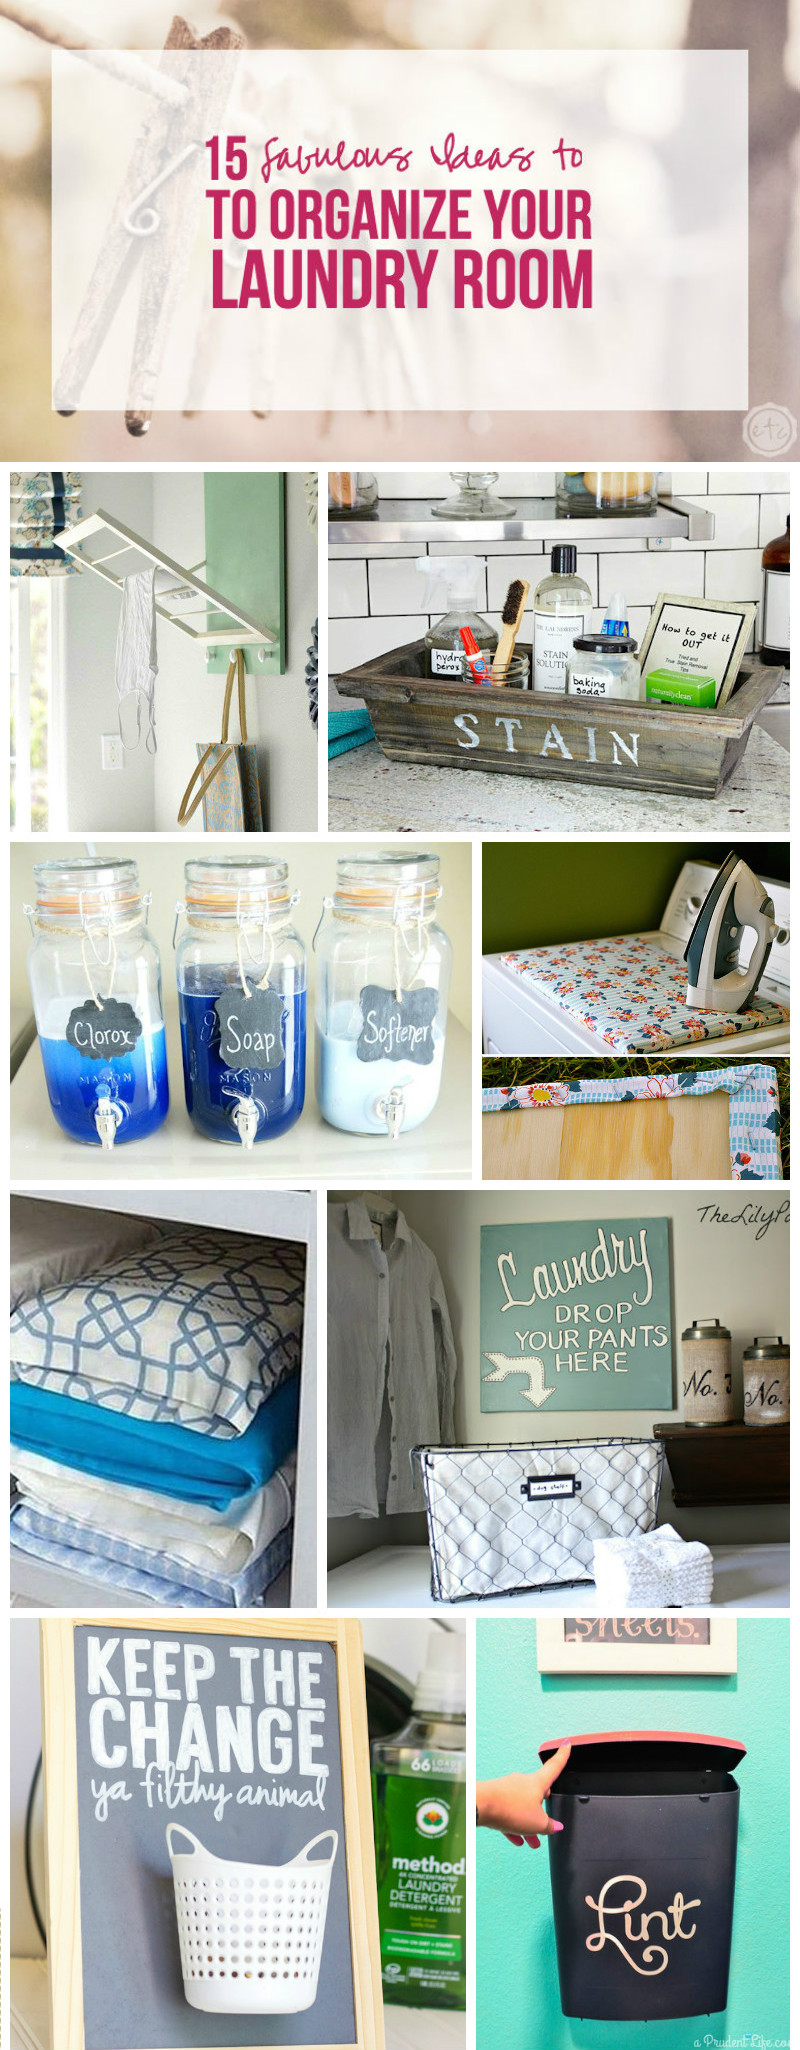 15 Fabulous Ideas to Organize your Laundry Room